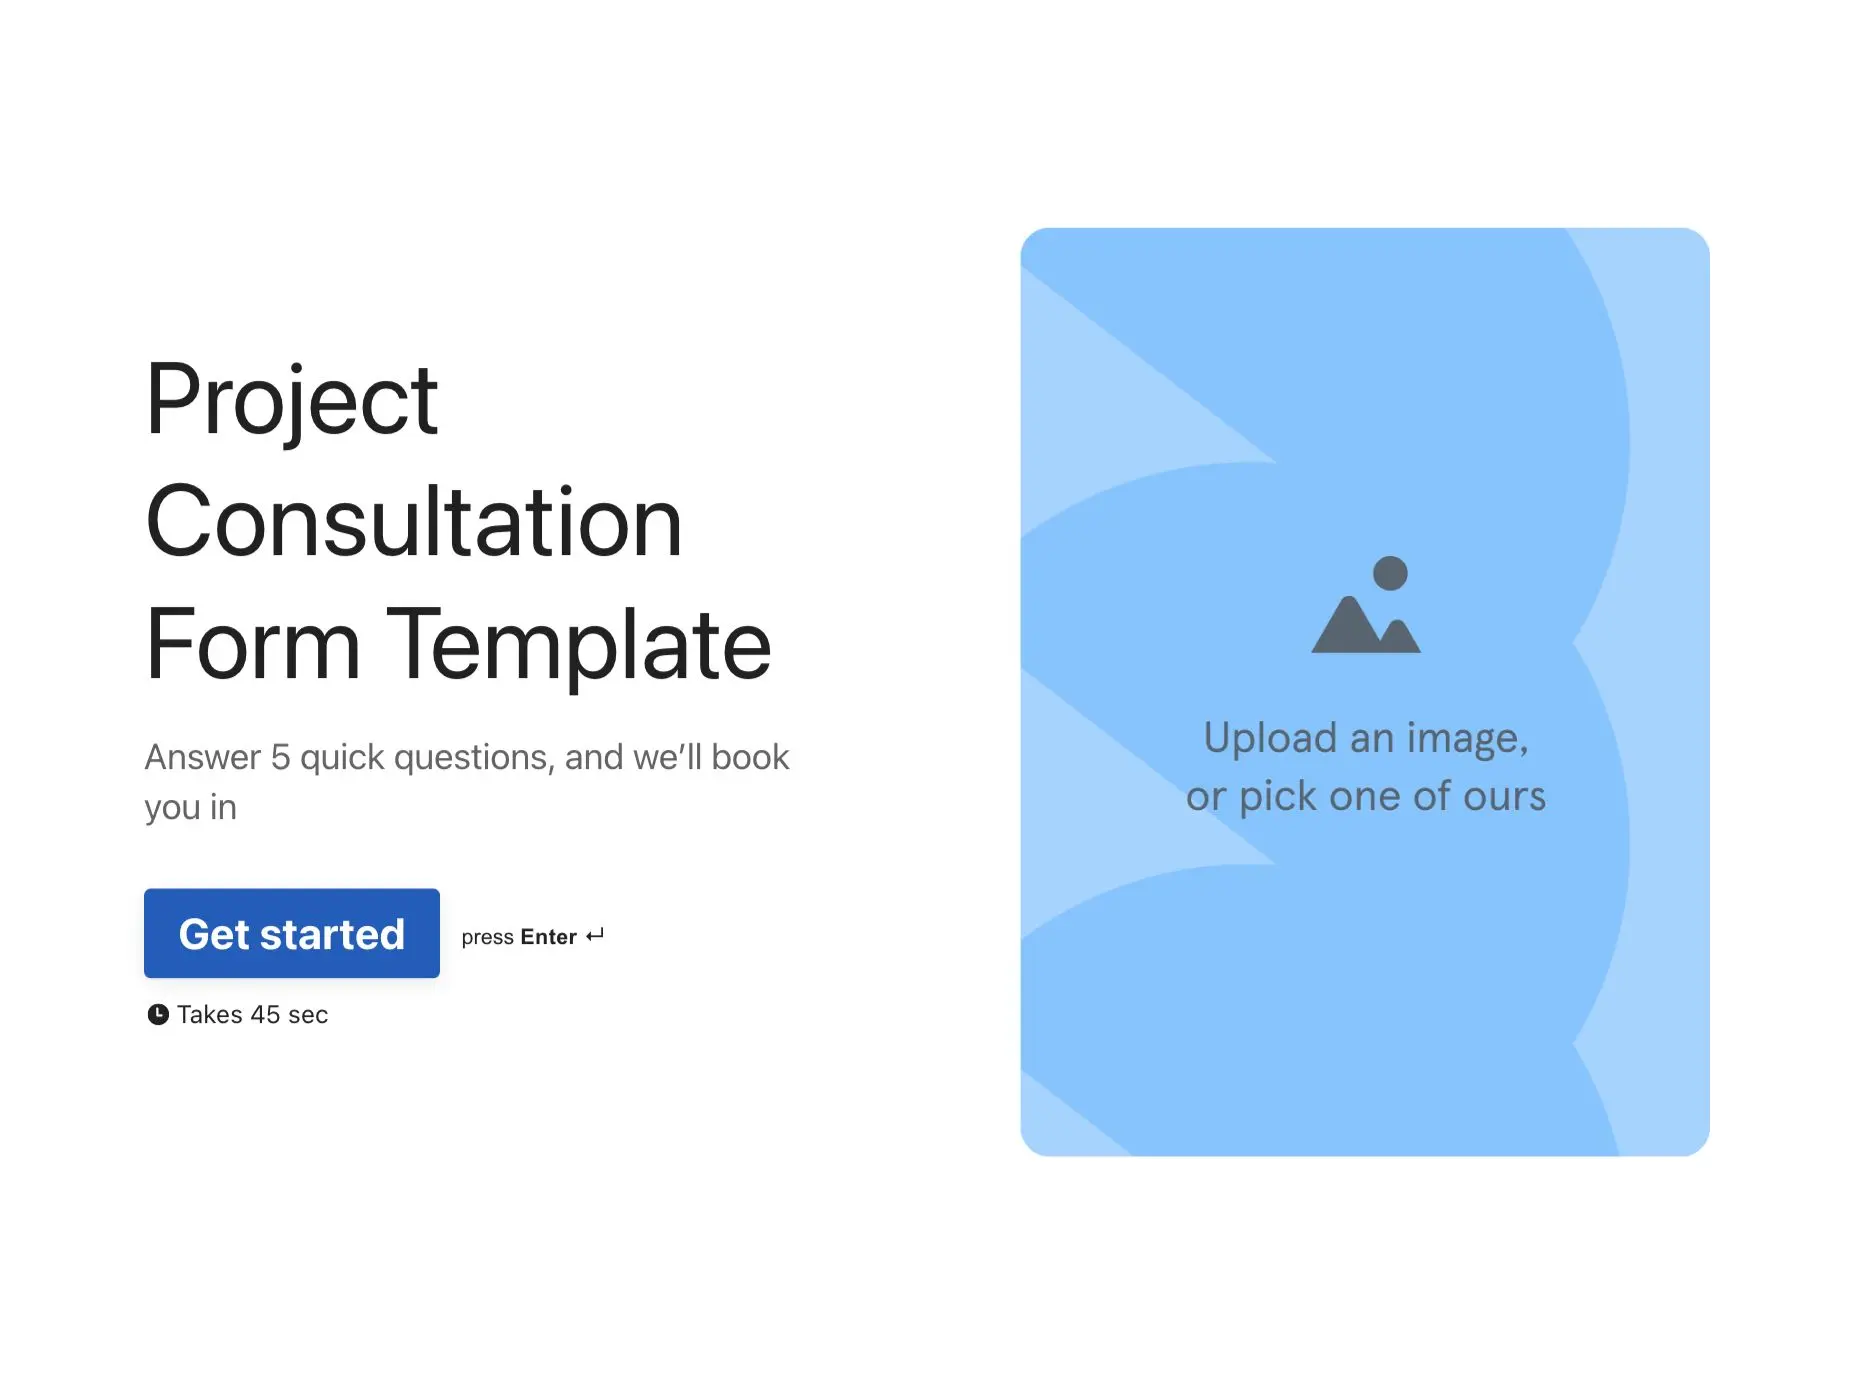 Project Consultation Form Template Hero